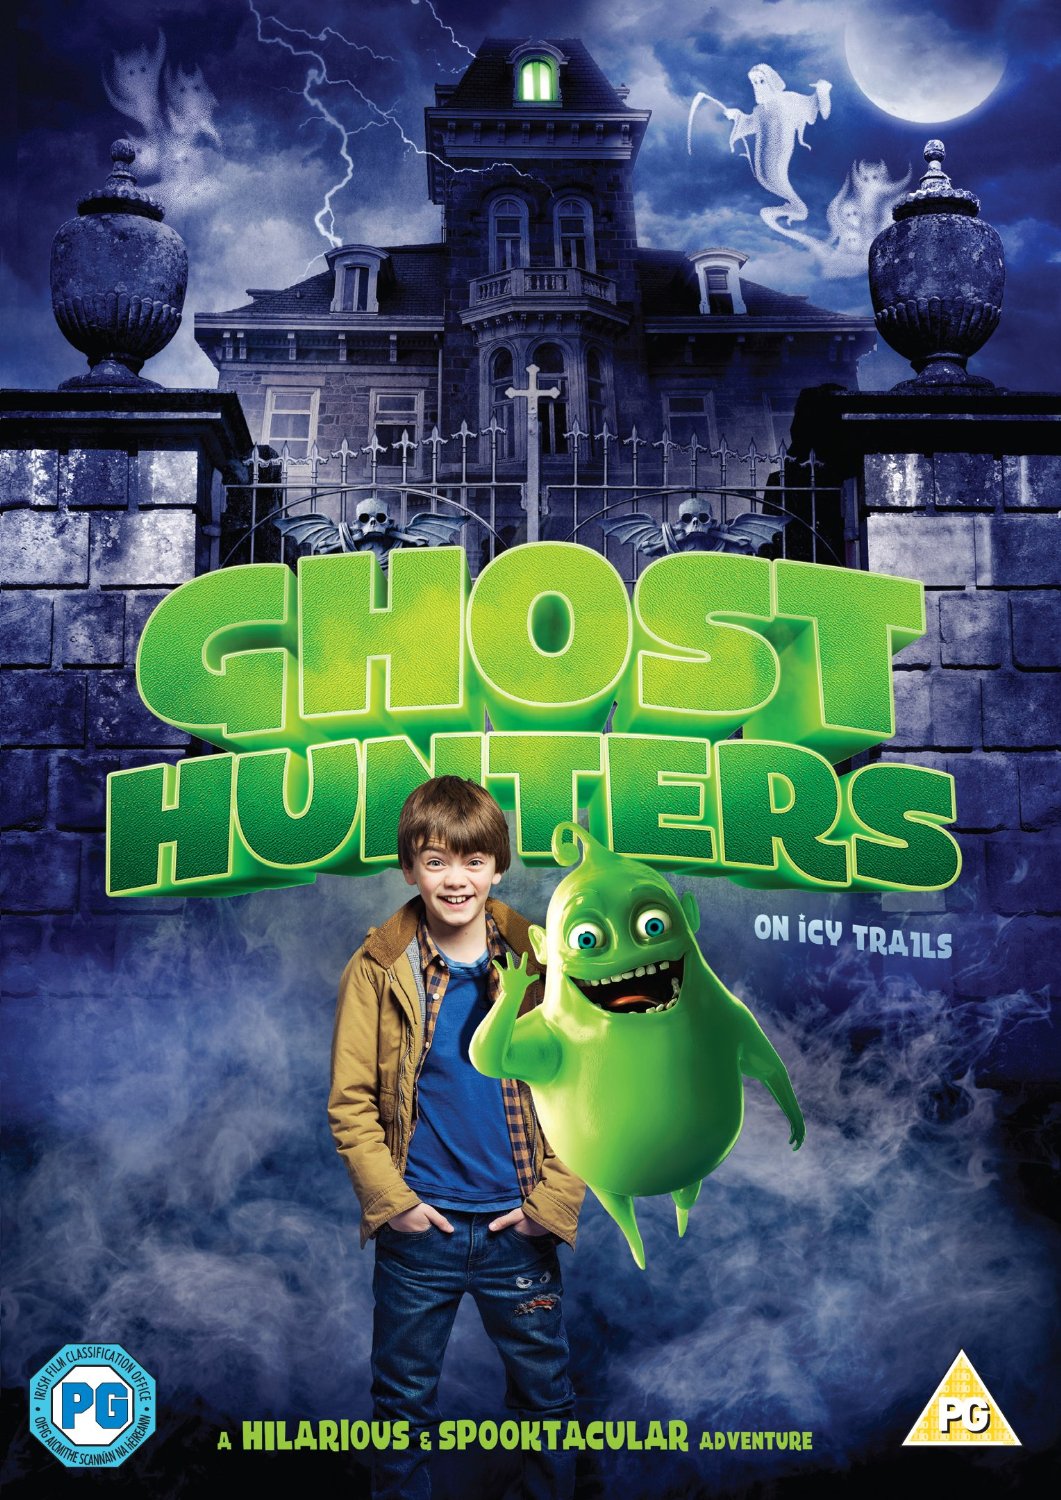 Ghosthunters on Icy Trails 2015 - Full (HDRIP)